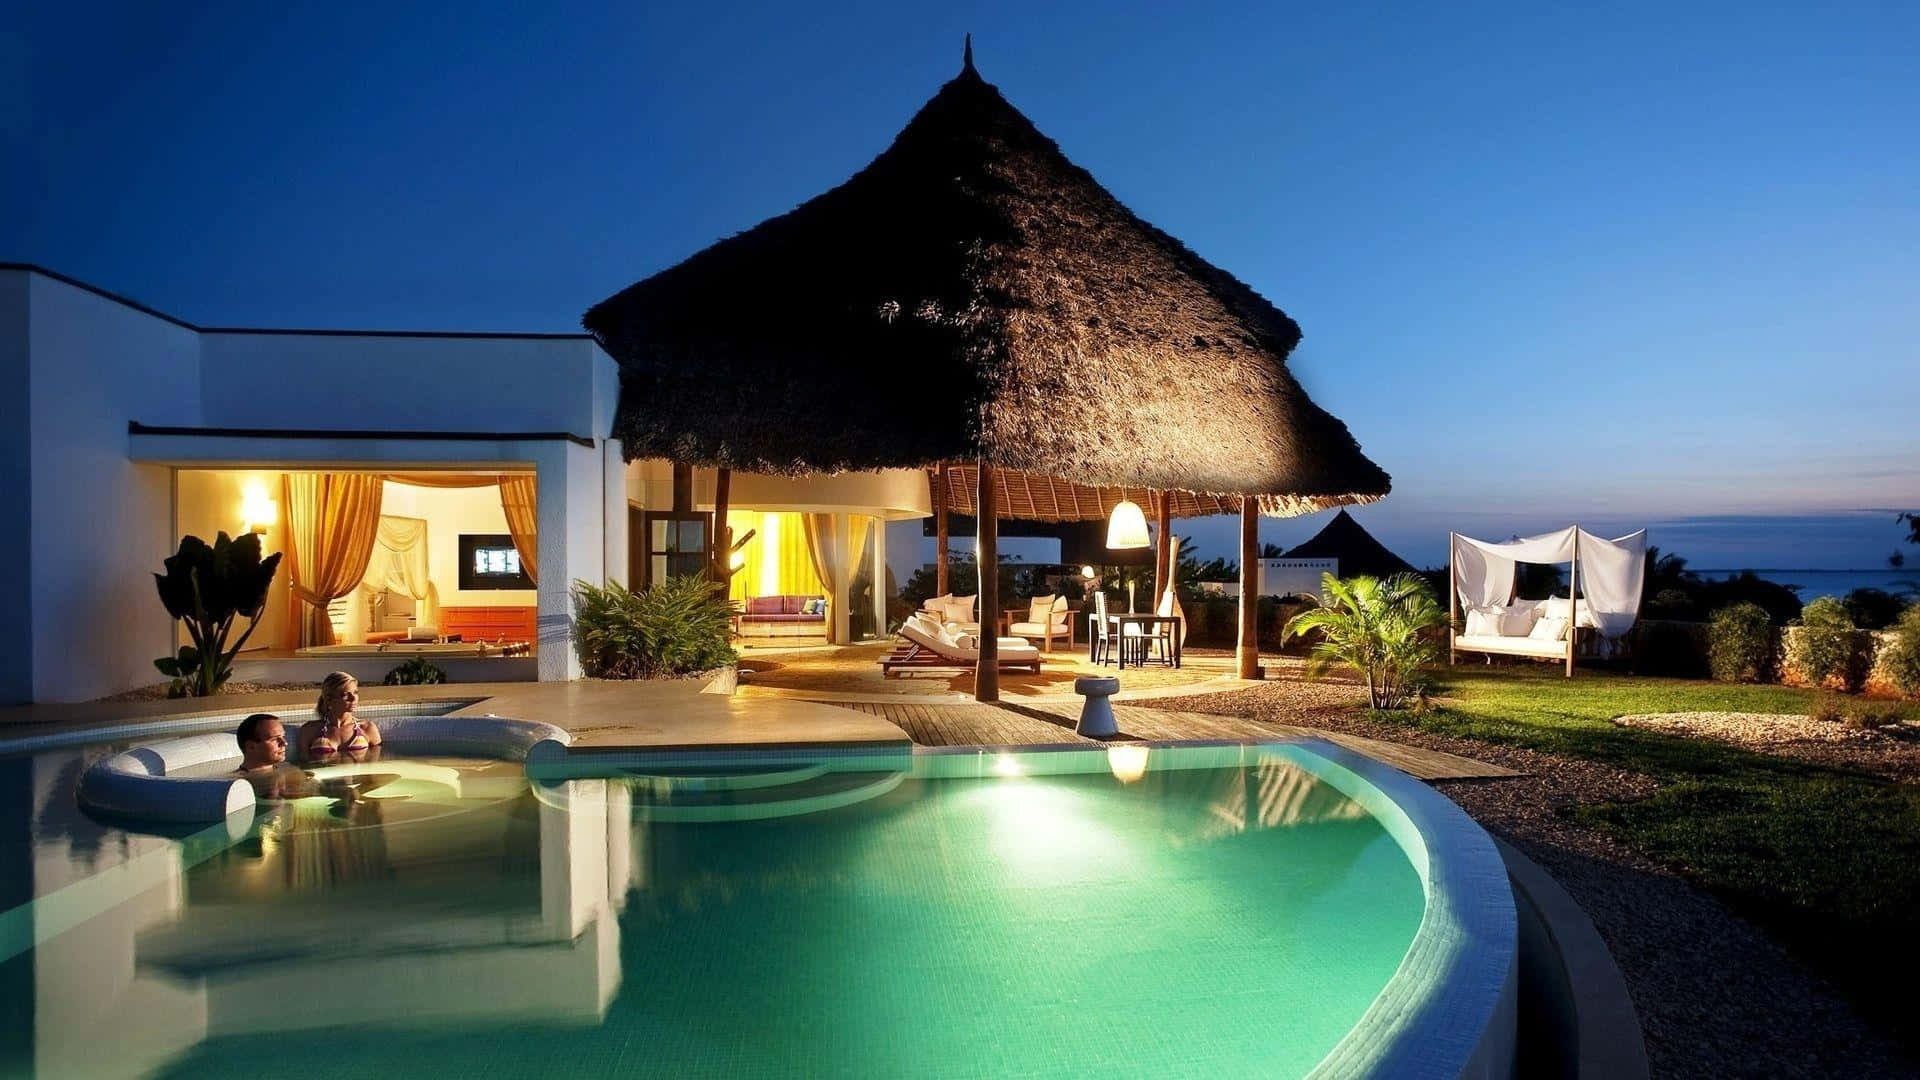 A Pool With A Thatched Roof And A Lounge Chair